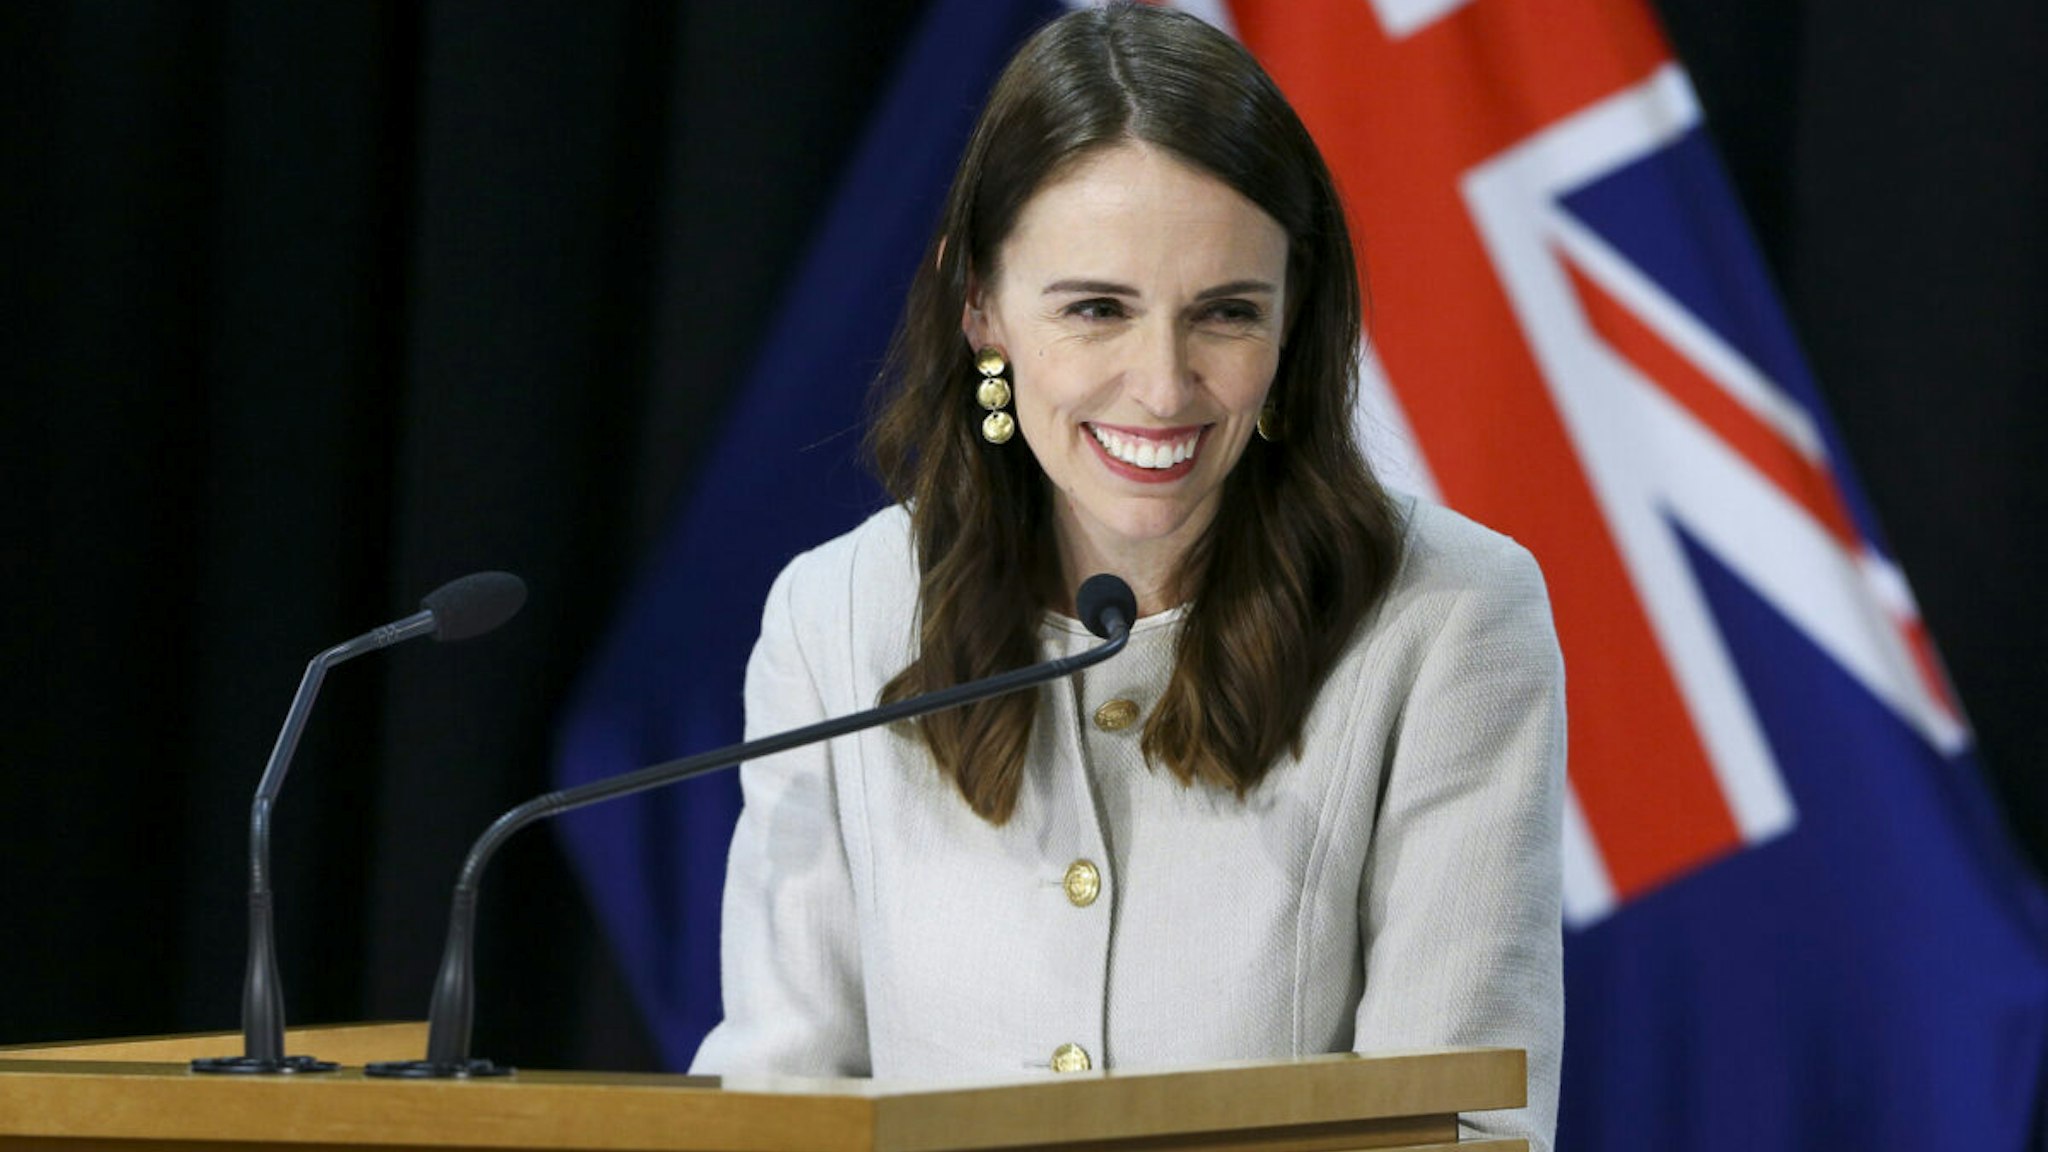 Prime Minister Jacinda Ardern speaks to media during a post cabinet press conference at Parliament on May 04, 2020 in Wellington, New Zealand.